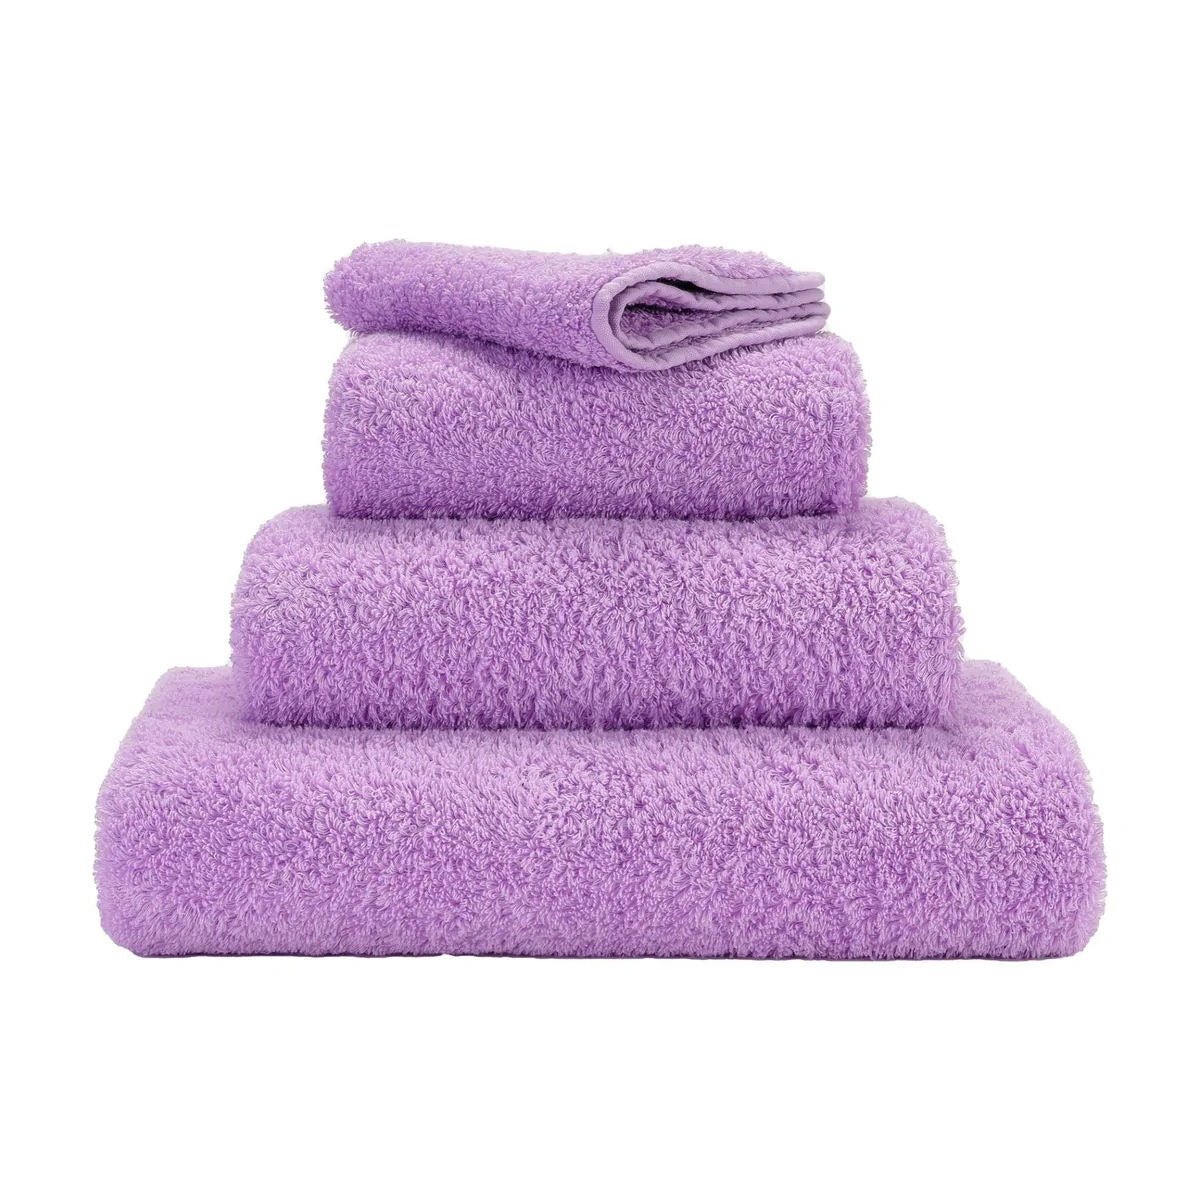 Super Pile Egyptian Cotton Bath Towels by Abyss & Habidecor | 430 Lupin - |VESIMI Design| Luxury and Rustic bathrooms online